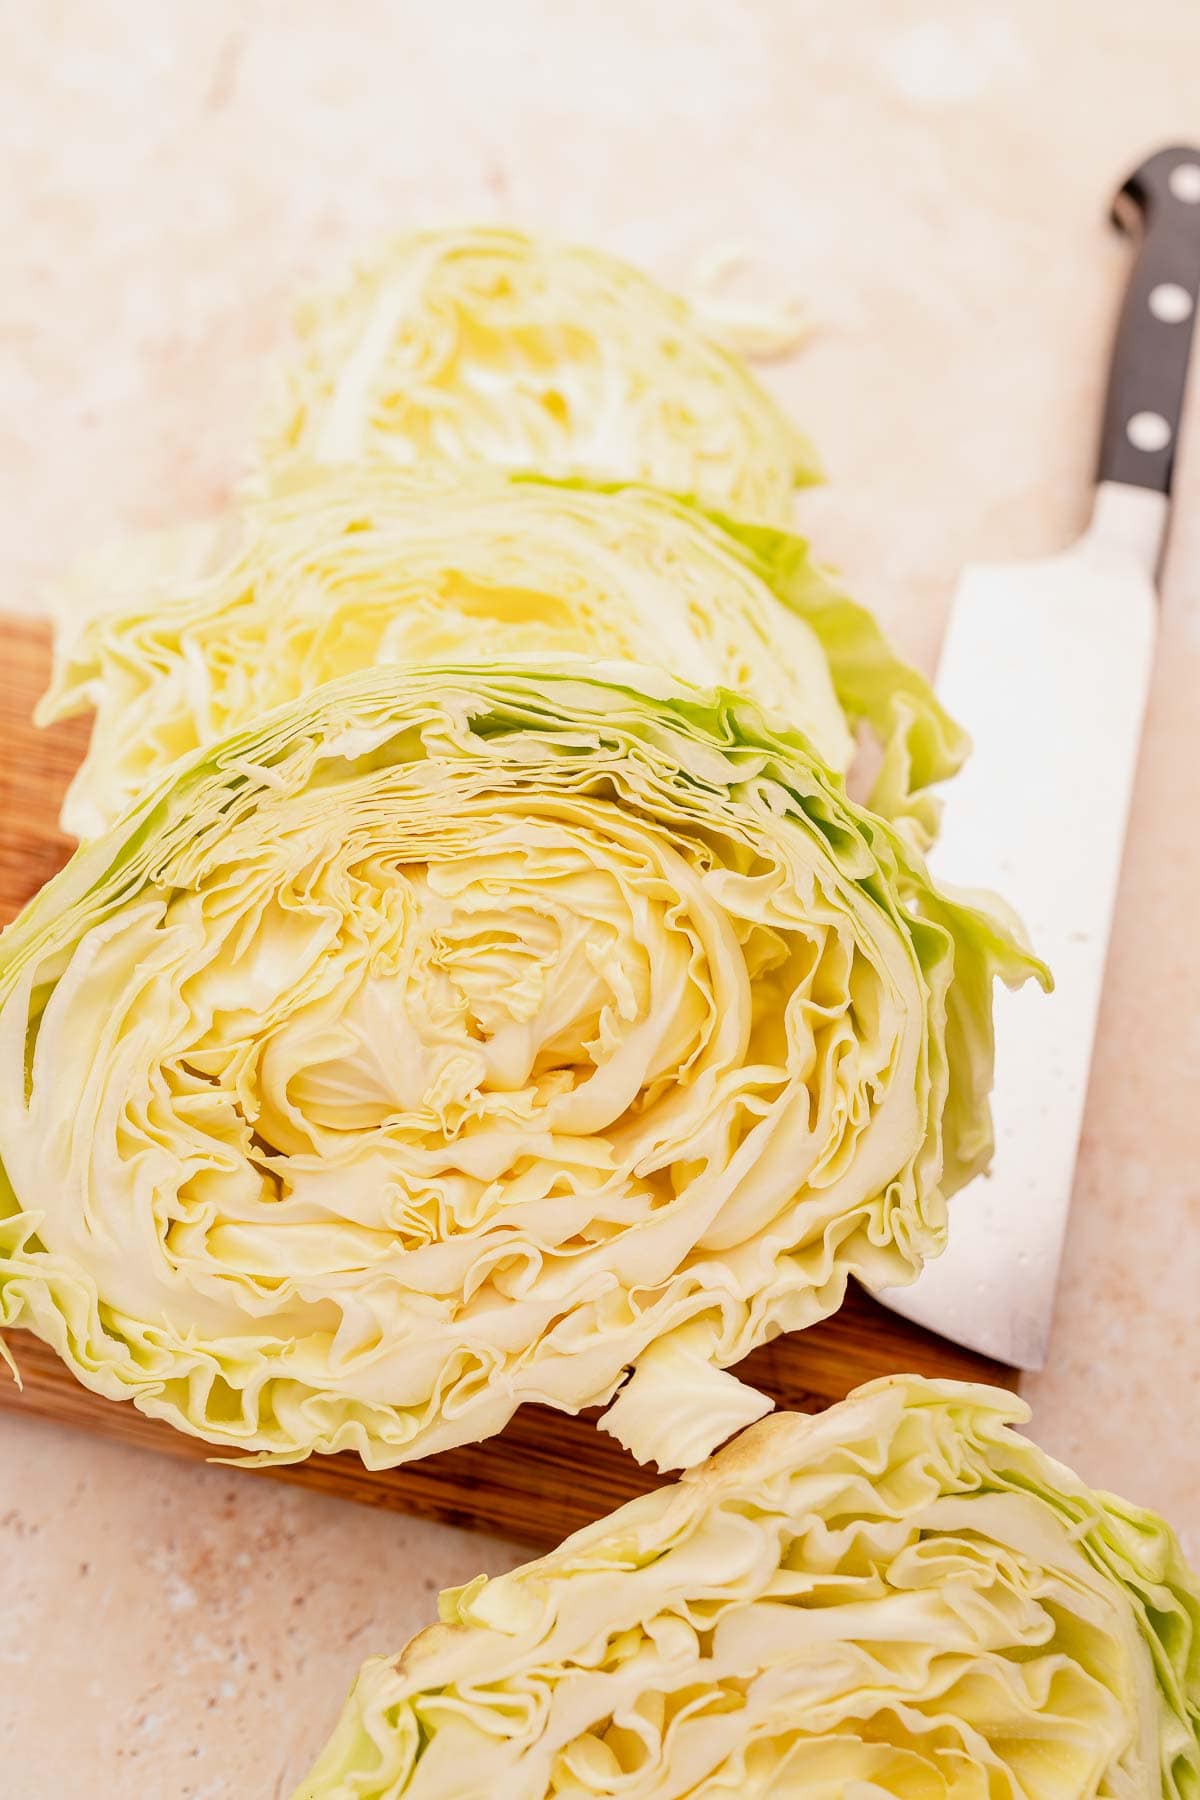 Sliced cabbage steaks on a wooden cutting board next to a chef's knife, showcasing the layered interior of the vegetable.